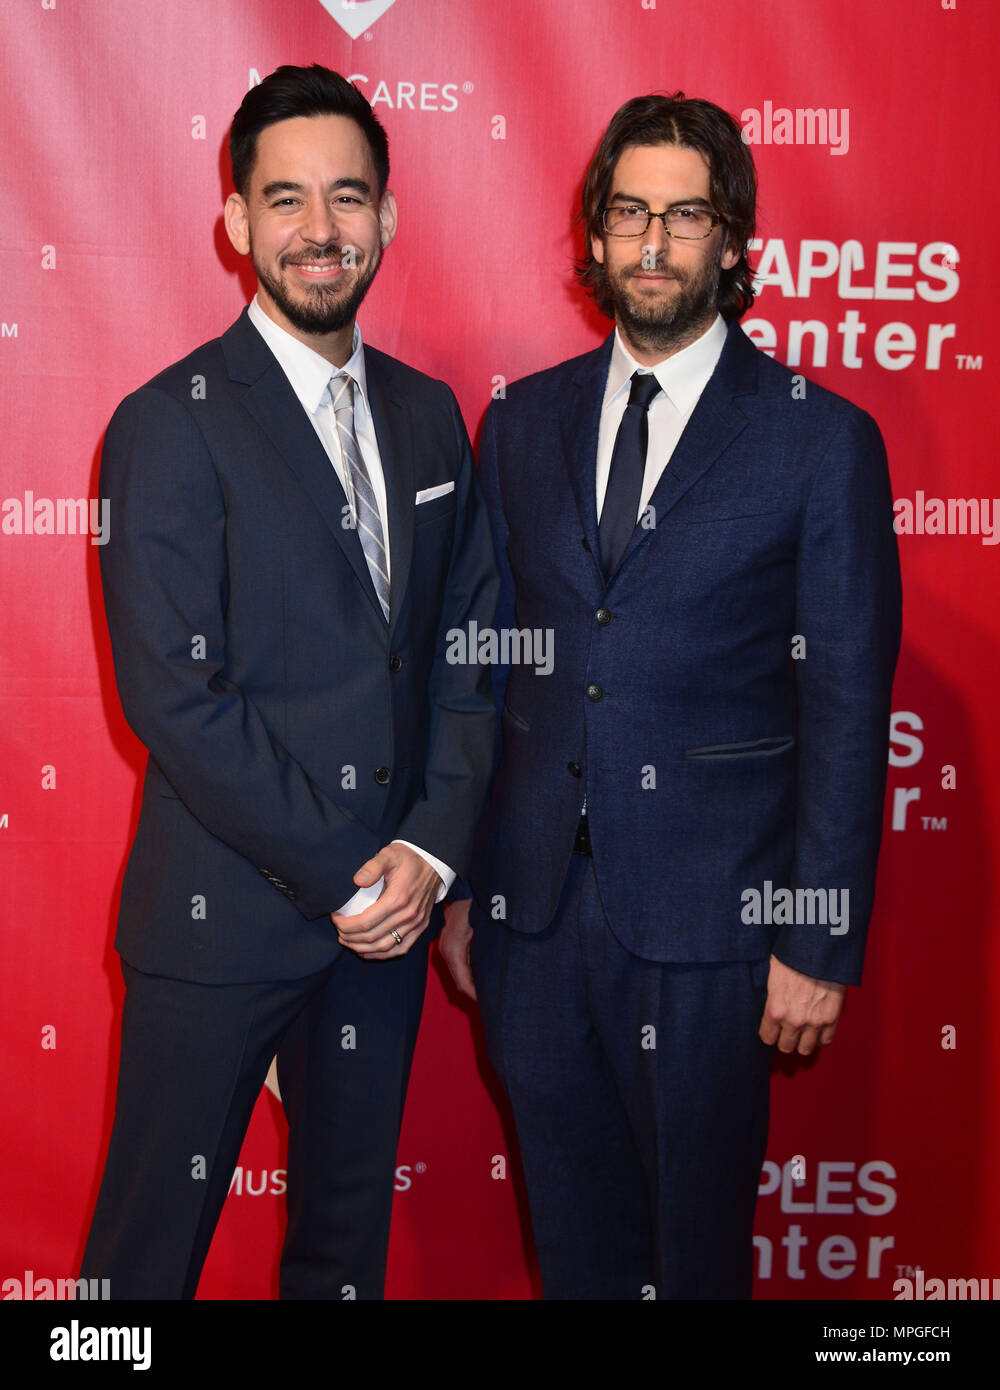 Mike Shinoda, Rob Bourdon - Linkin Park - 081 at 2016 MusiCares Person of the Year Dinner honoring Lionel Richie at the Convention Center in Los Angeles. February 13, 2016.Mike Shinoda, Rob Bourdon - Linkin Park - 081  Event in Hollywood Life - California, Red Carpet Event, USA, Film Industry, Celebrities, Photography, Bestof, Arts Culture and Entertainment, Topix Celebrities fashion, Best of, Hollywood Life, Event in Hollywood Life - California, Red Carpet and backstage, movie celebrities, TV celebrities, Music celebrities, Arts Culture and Entertainment, vertical, one person, Photography,    Stock Photo